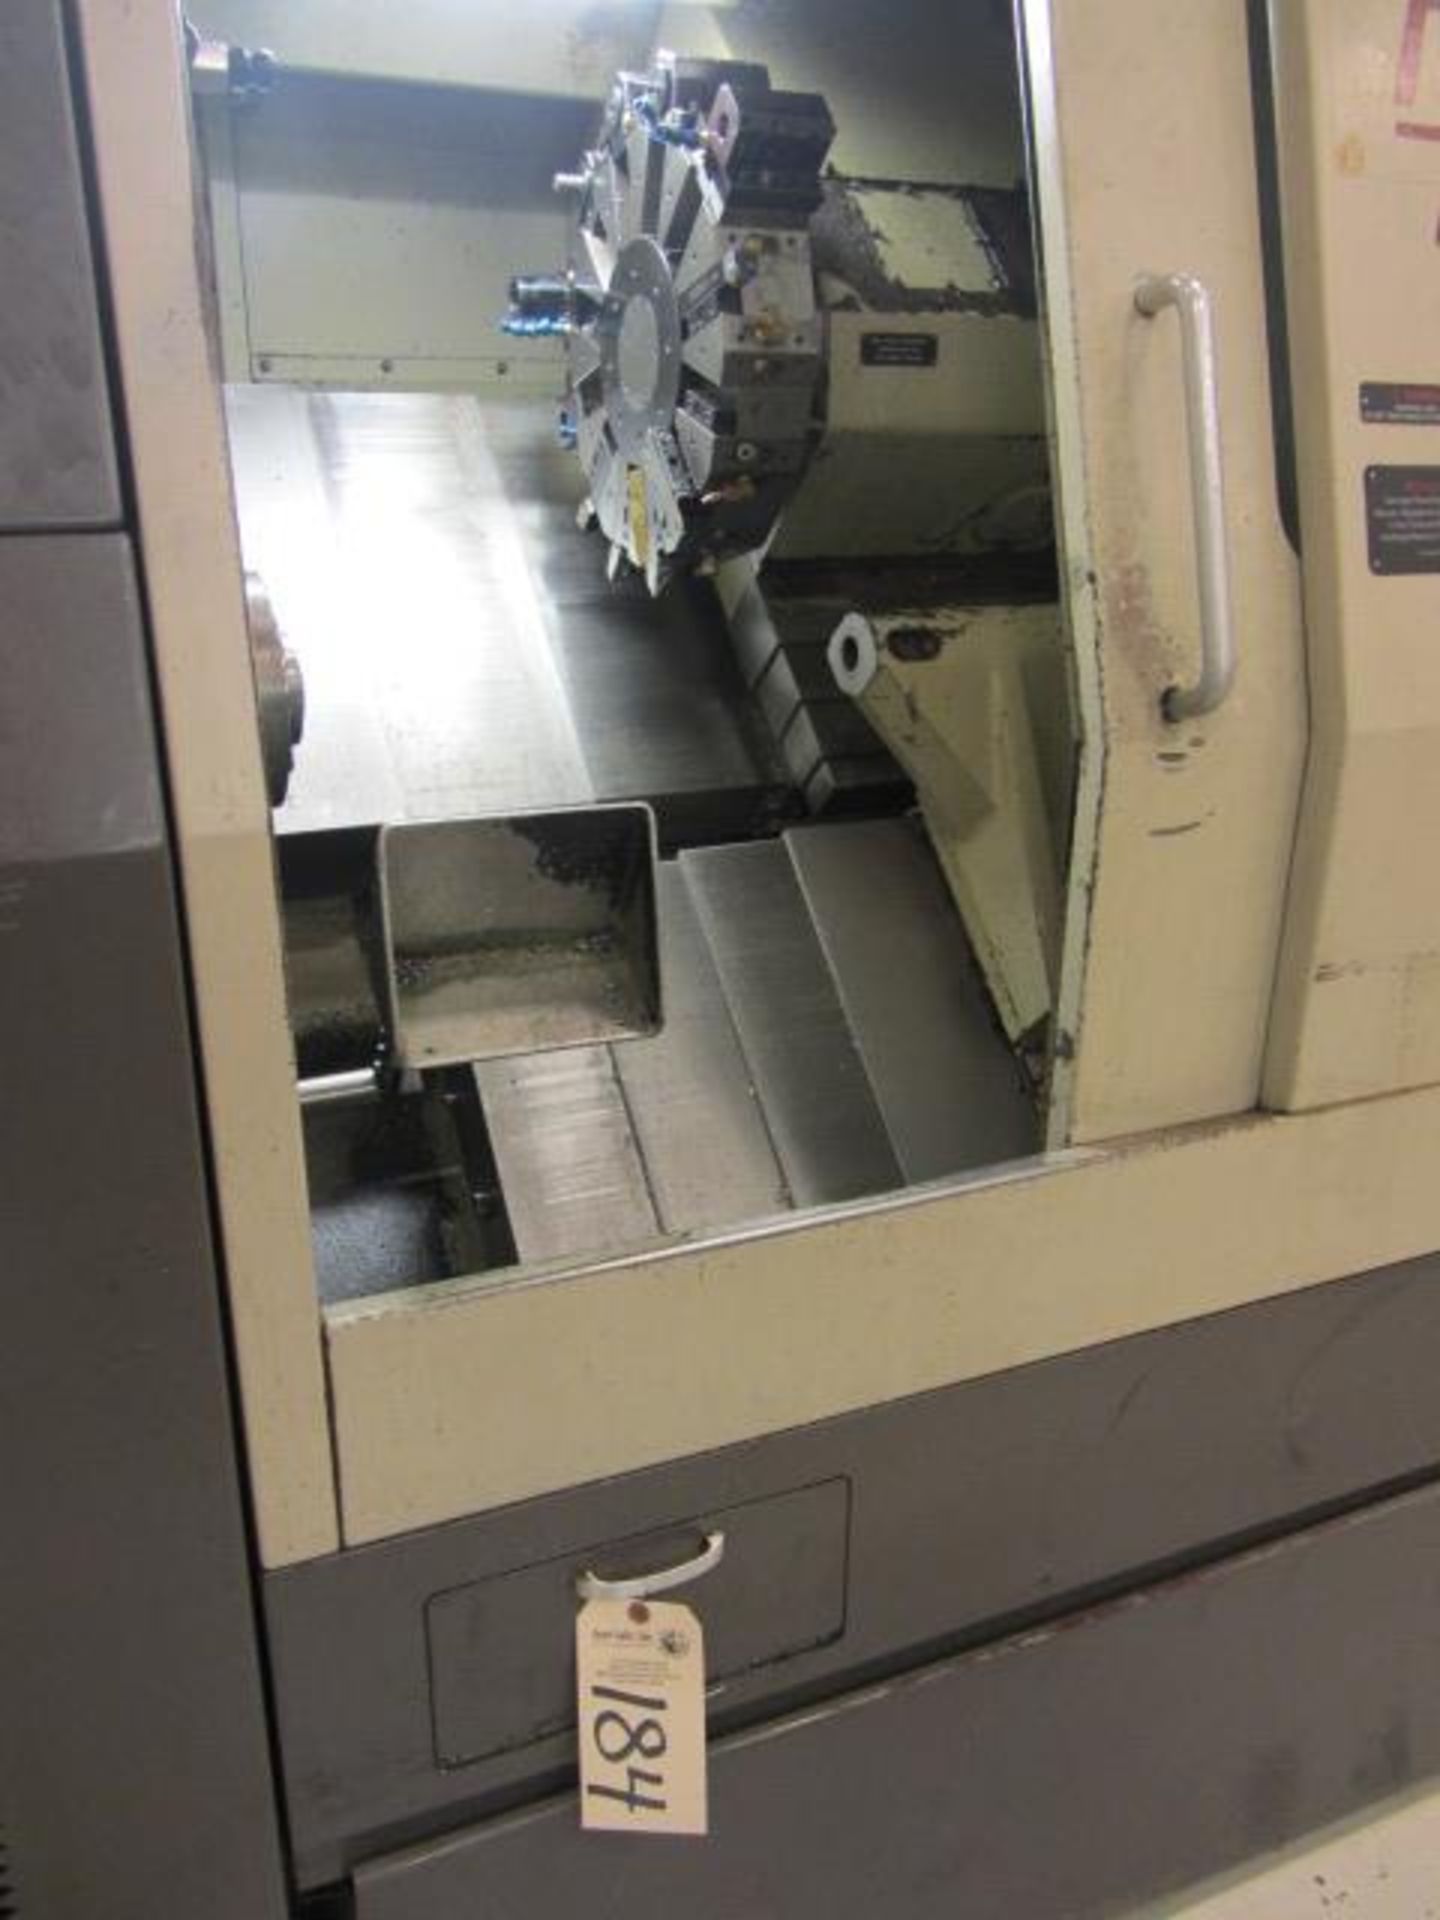 Hardinge Conquest T42 CNC Turning Center with 6'' Chuck, Collet Spindle Nose, Spindle Speeds to 5000 - Bild 2 aus 9